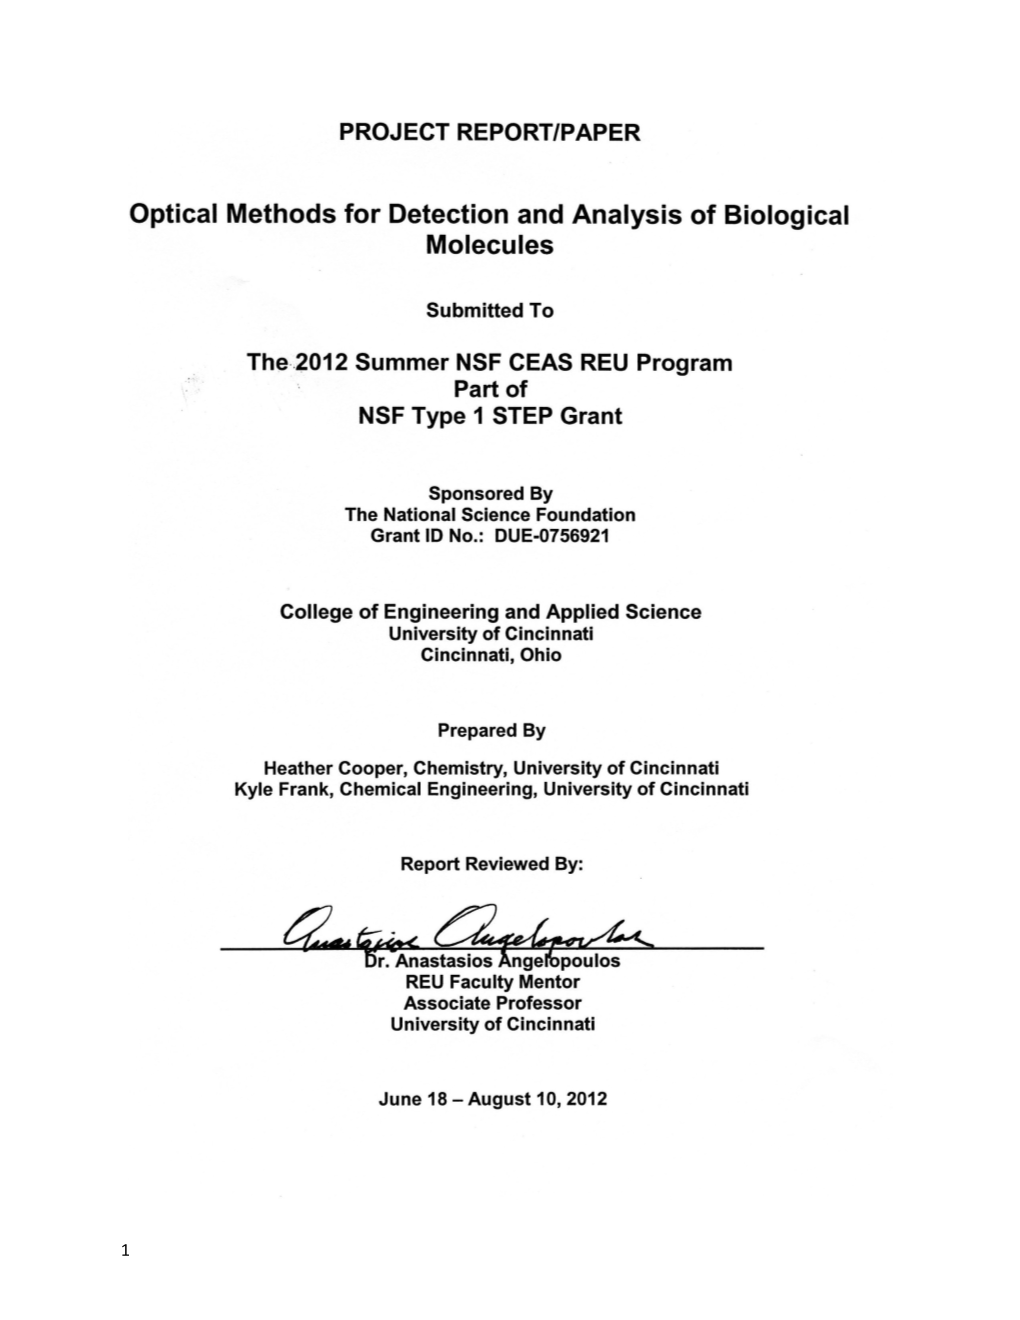 Technical Paper: Optical Method for Detection and Analysis of Biological Molecules